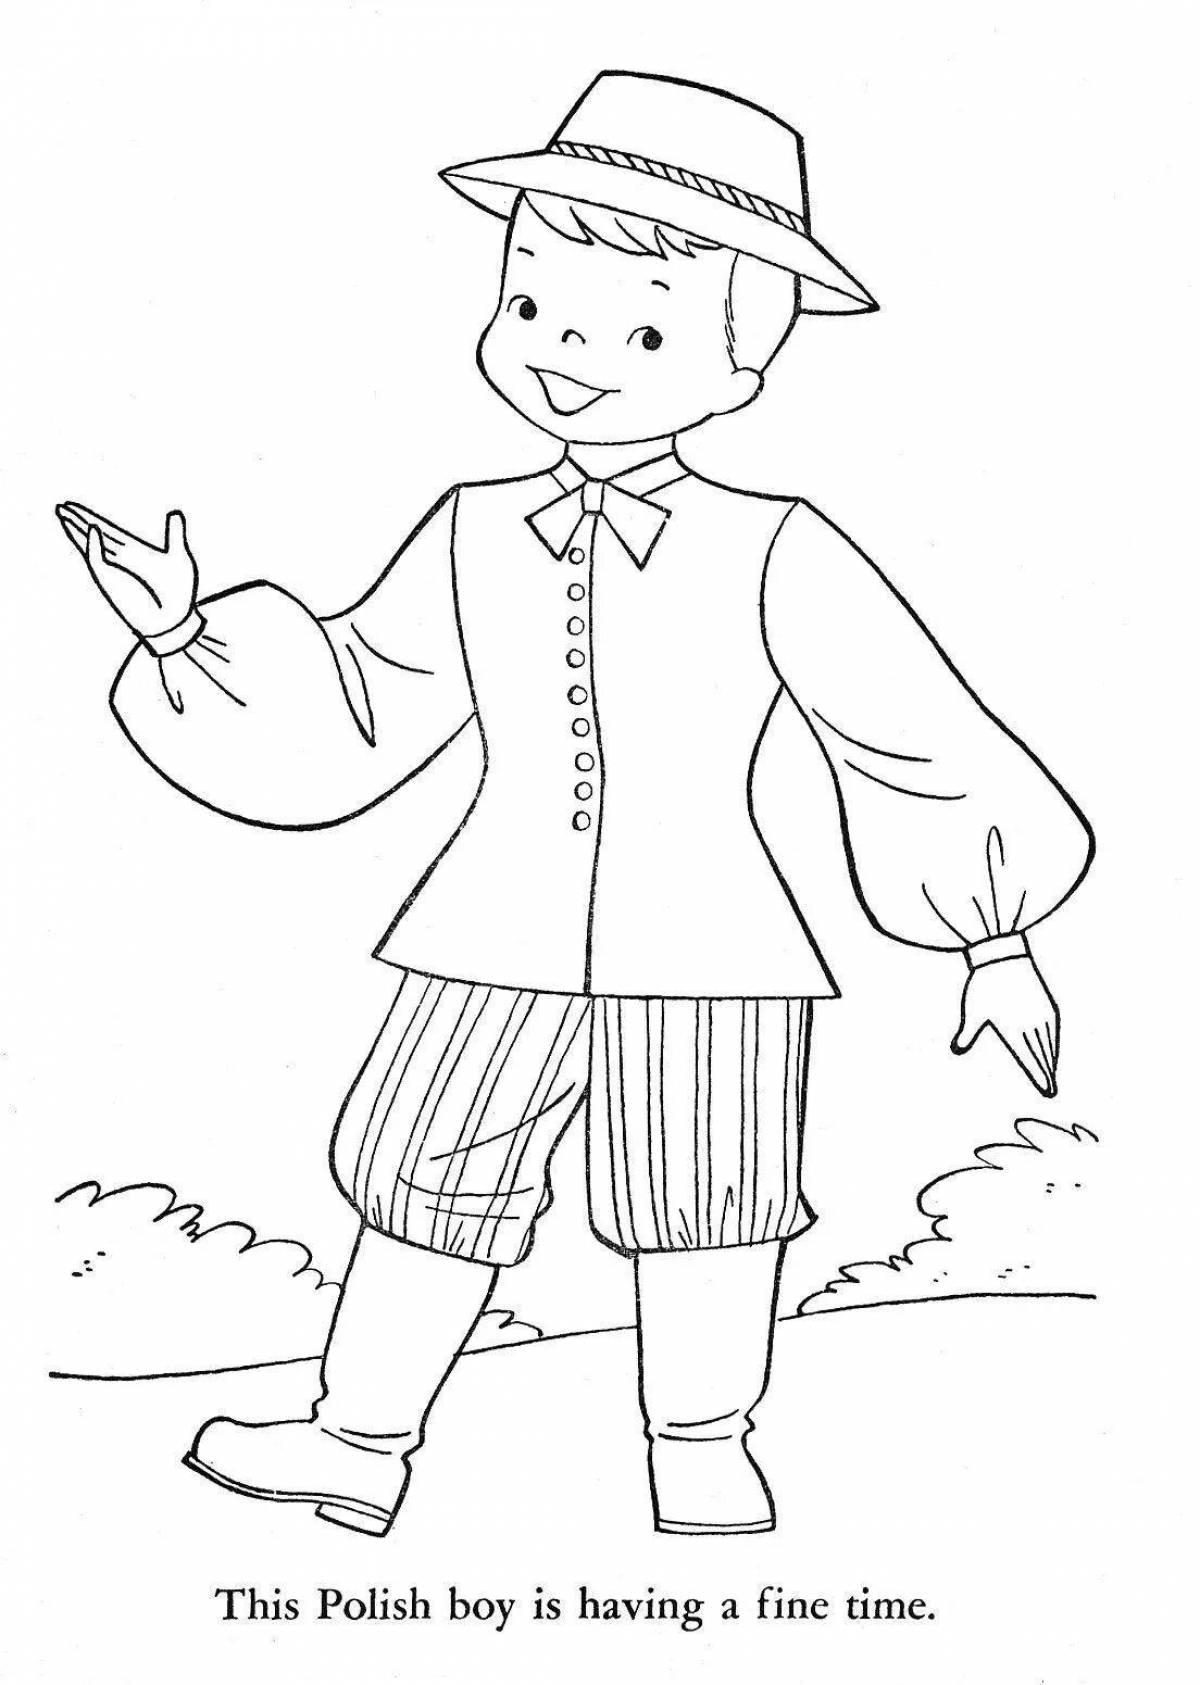 Colorful costume coloring page